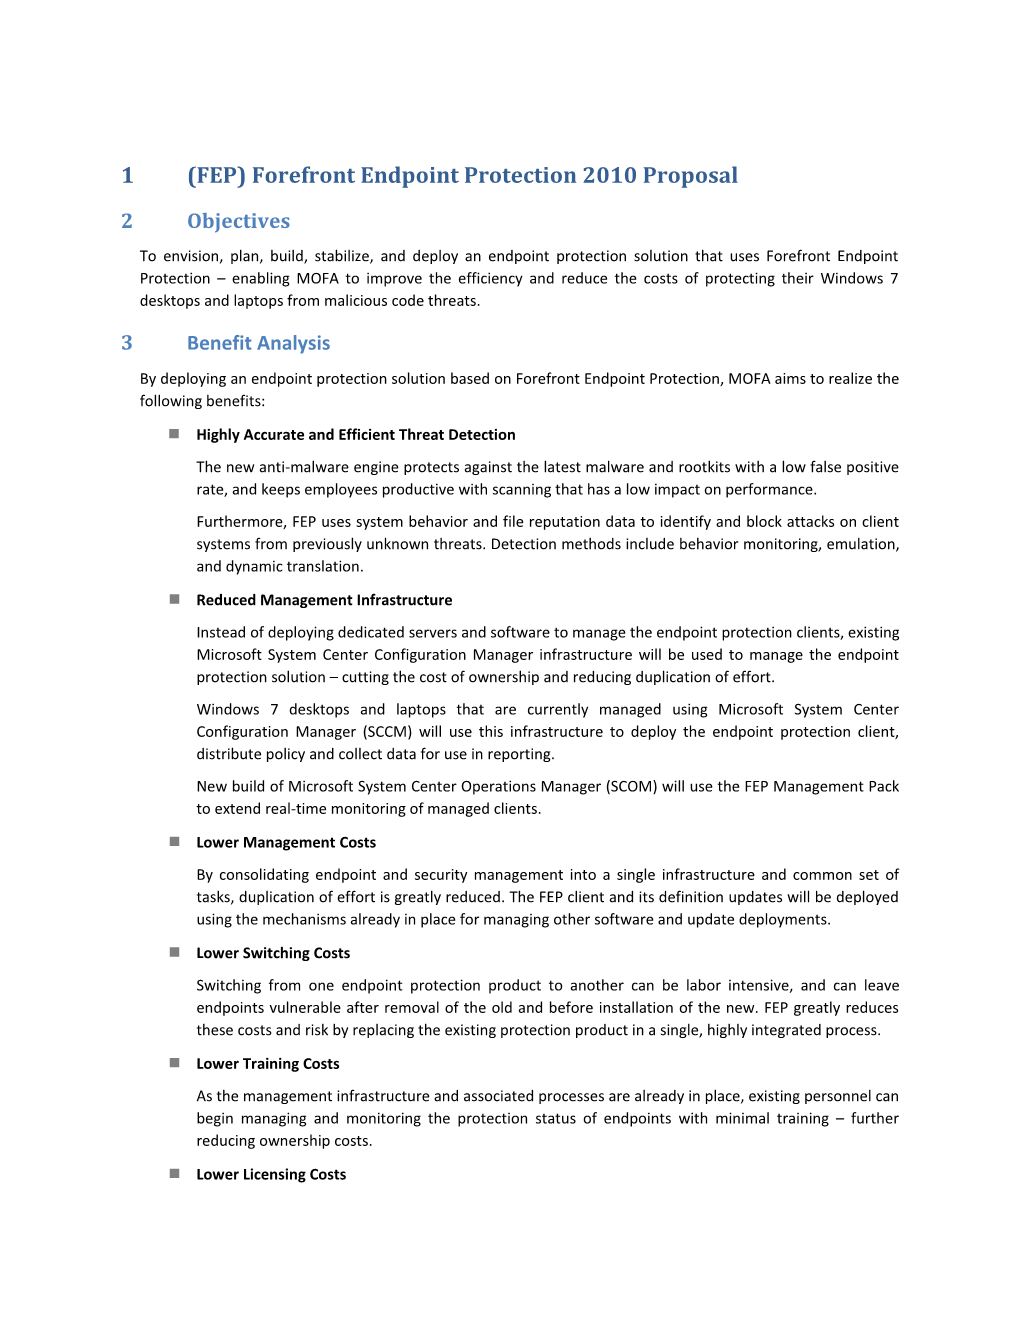 (FEP)Forefront Endpoint Protection 2010 Proposal